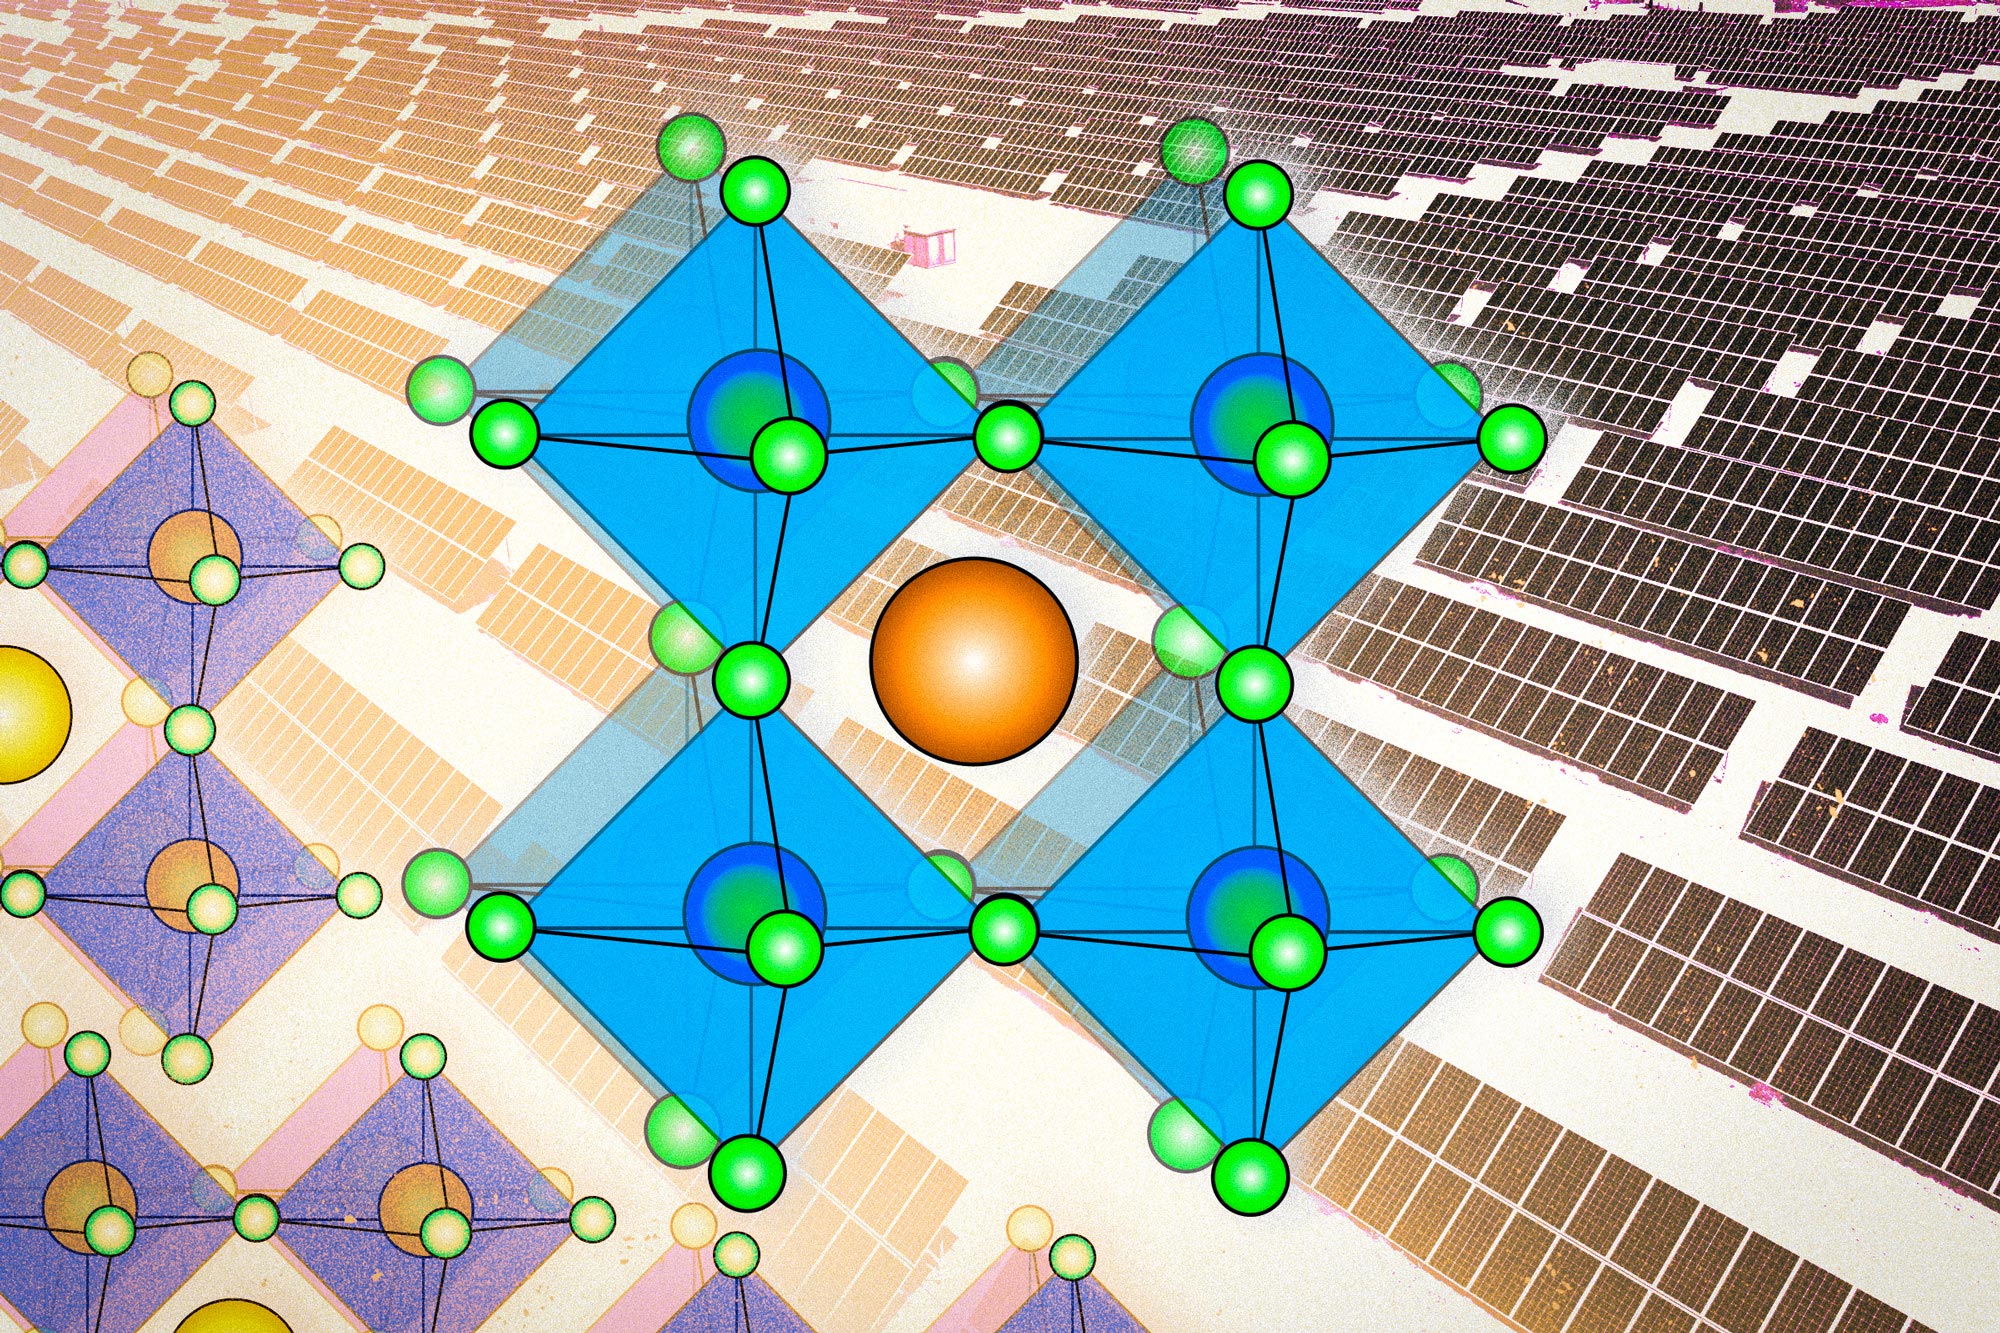 alternative-to-silicon-why-perovskites-could-take-solar-cells-to-new-heights